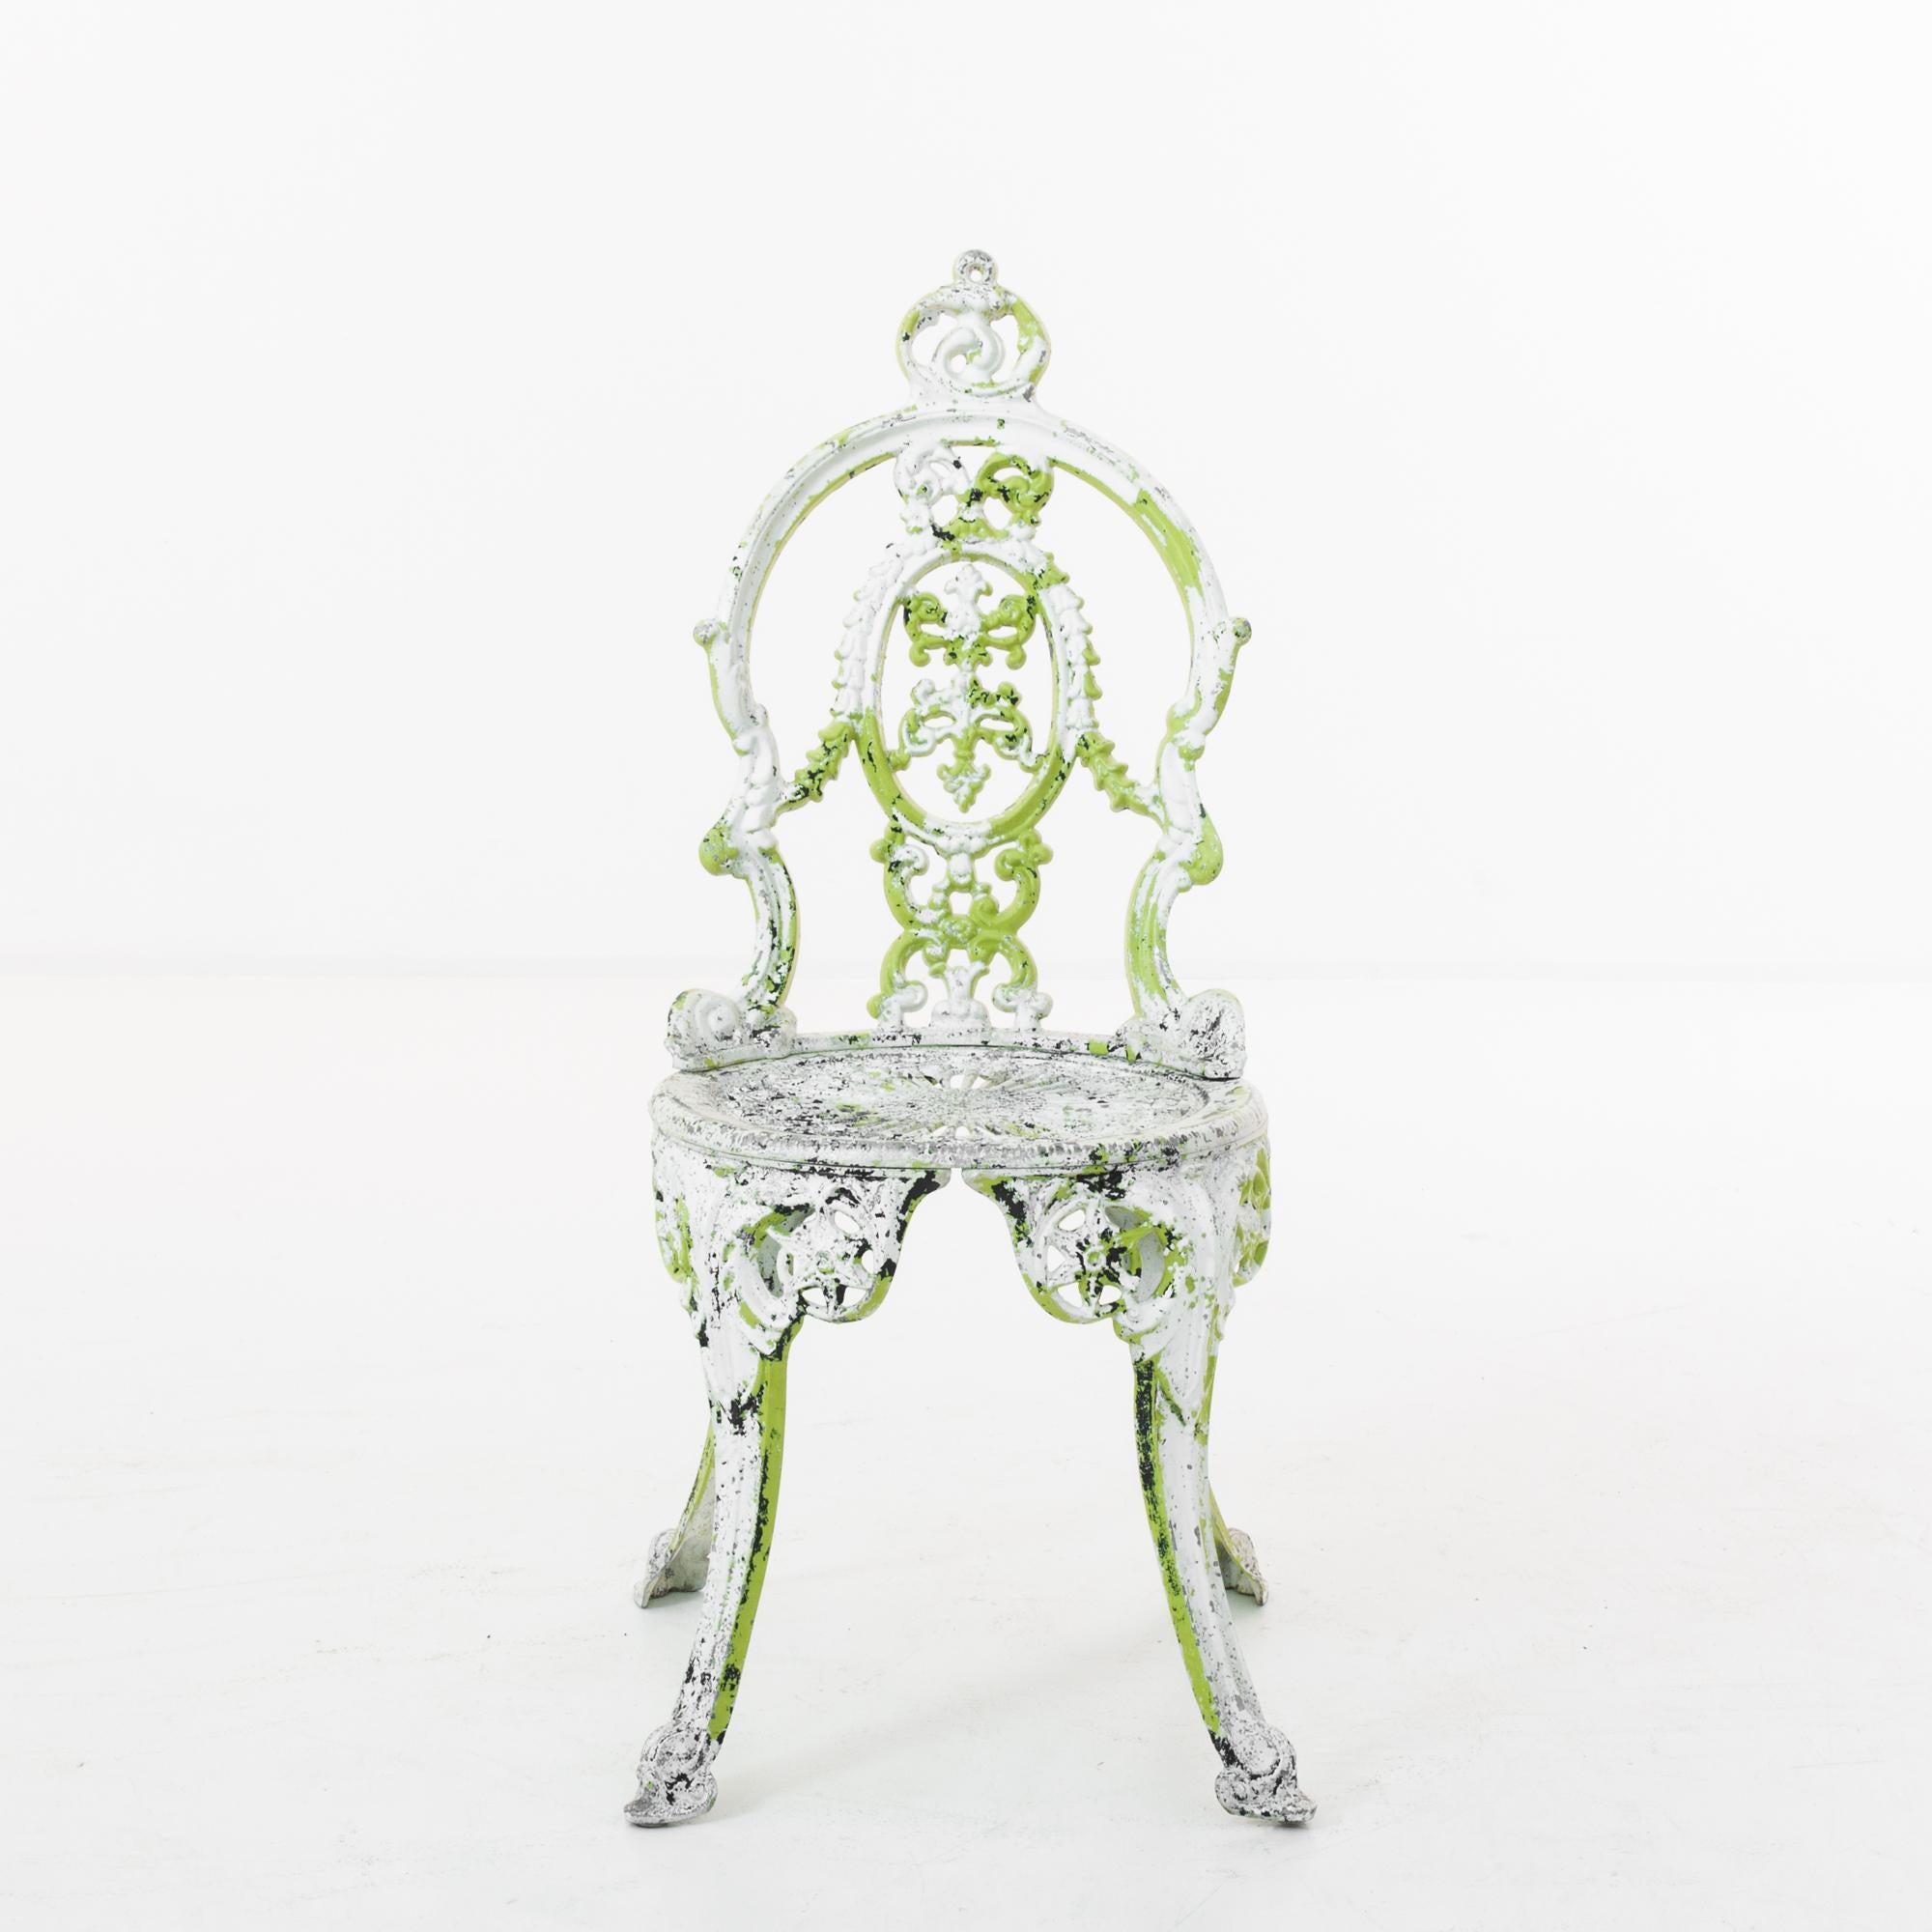 A cast iron chair from France, produced circa 1960. A richly decorated garden chair with white and green patination. This cast metal seat stands out for its unique vivid green patination coming out in artful patches, as well as for the ornate trim